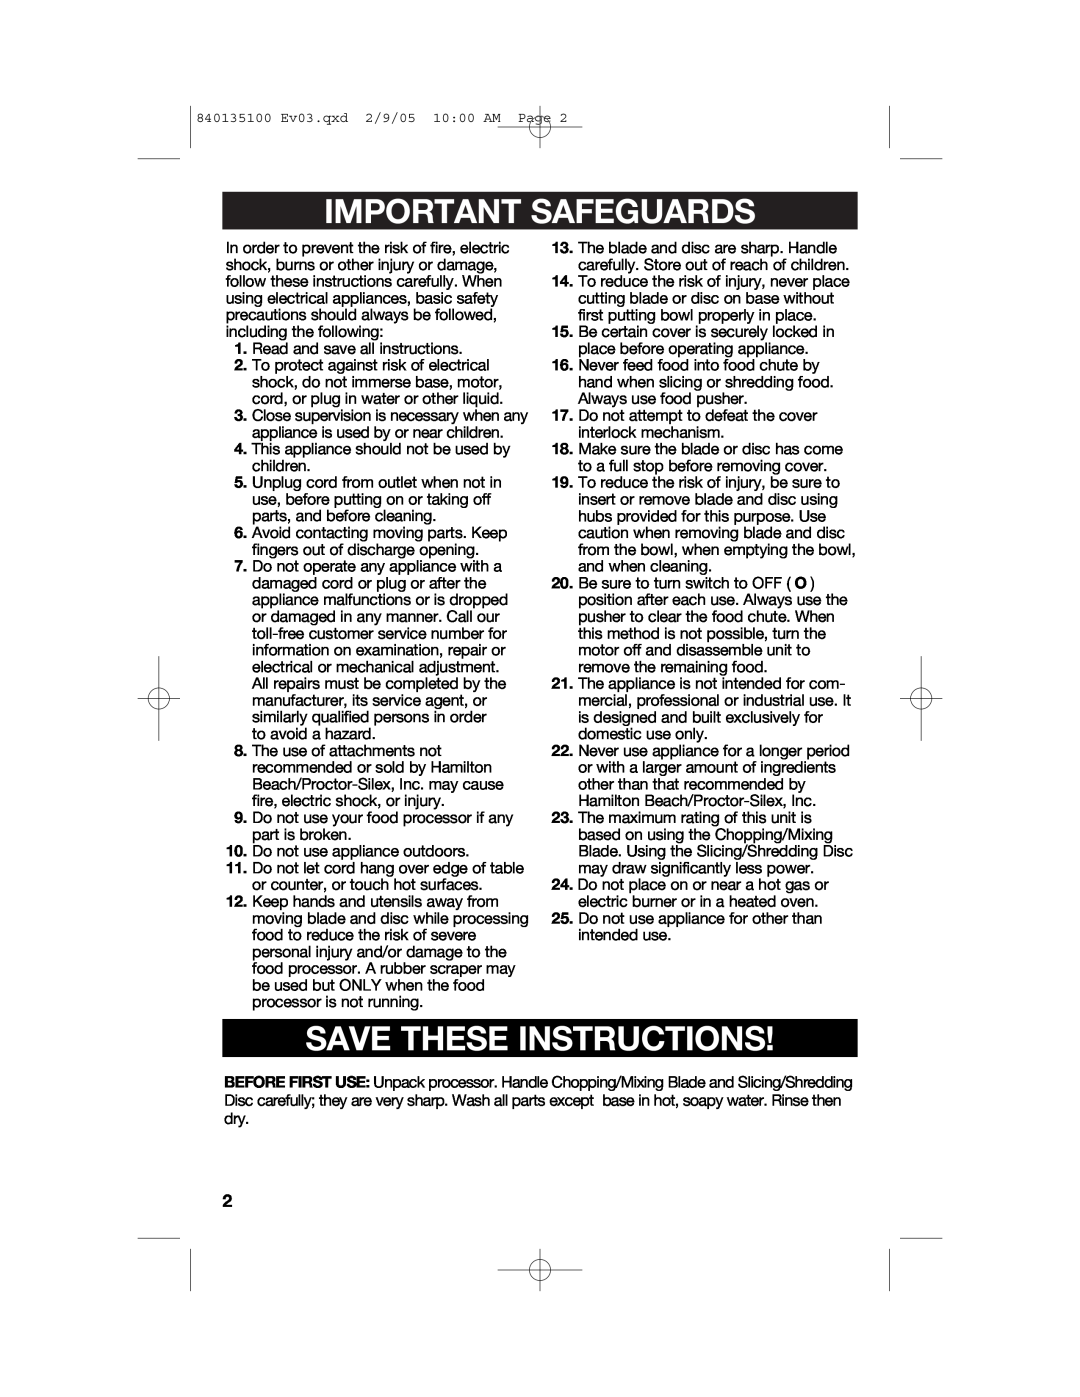 Hamilton Beach 840135100 manual Important Safeguards, Save These Instructions 